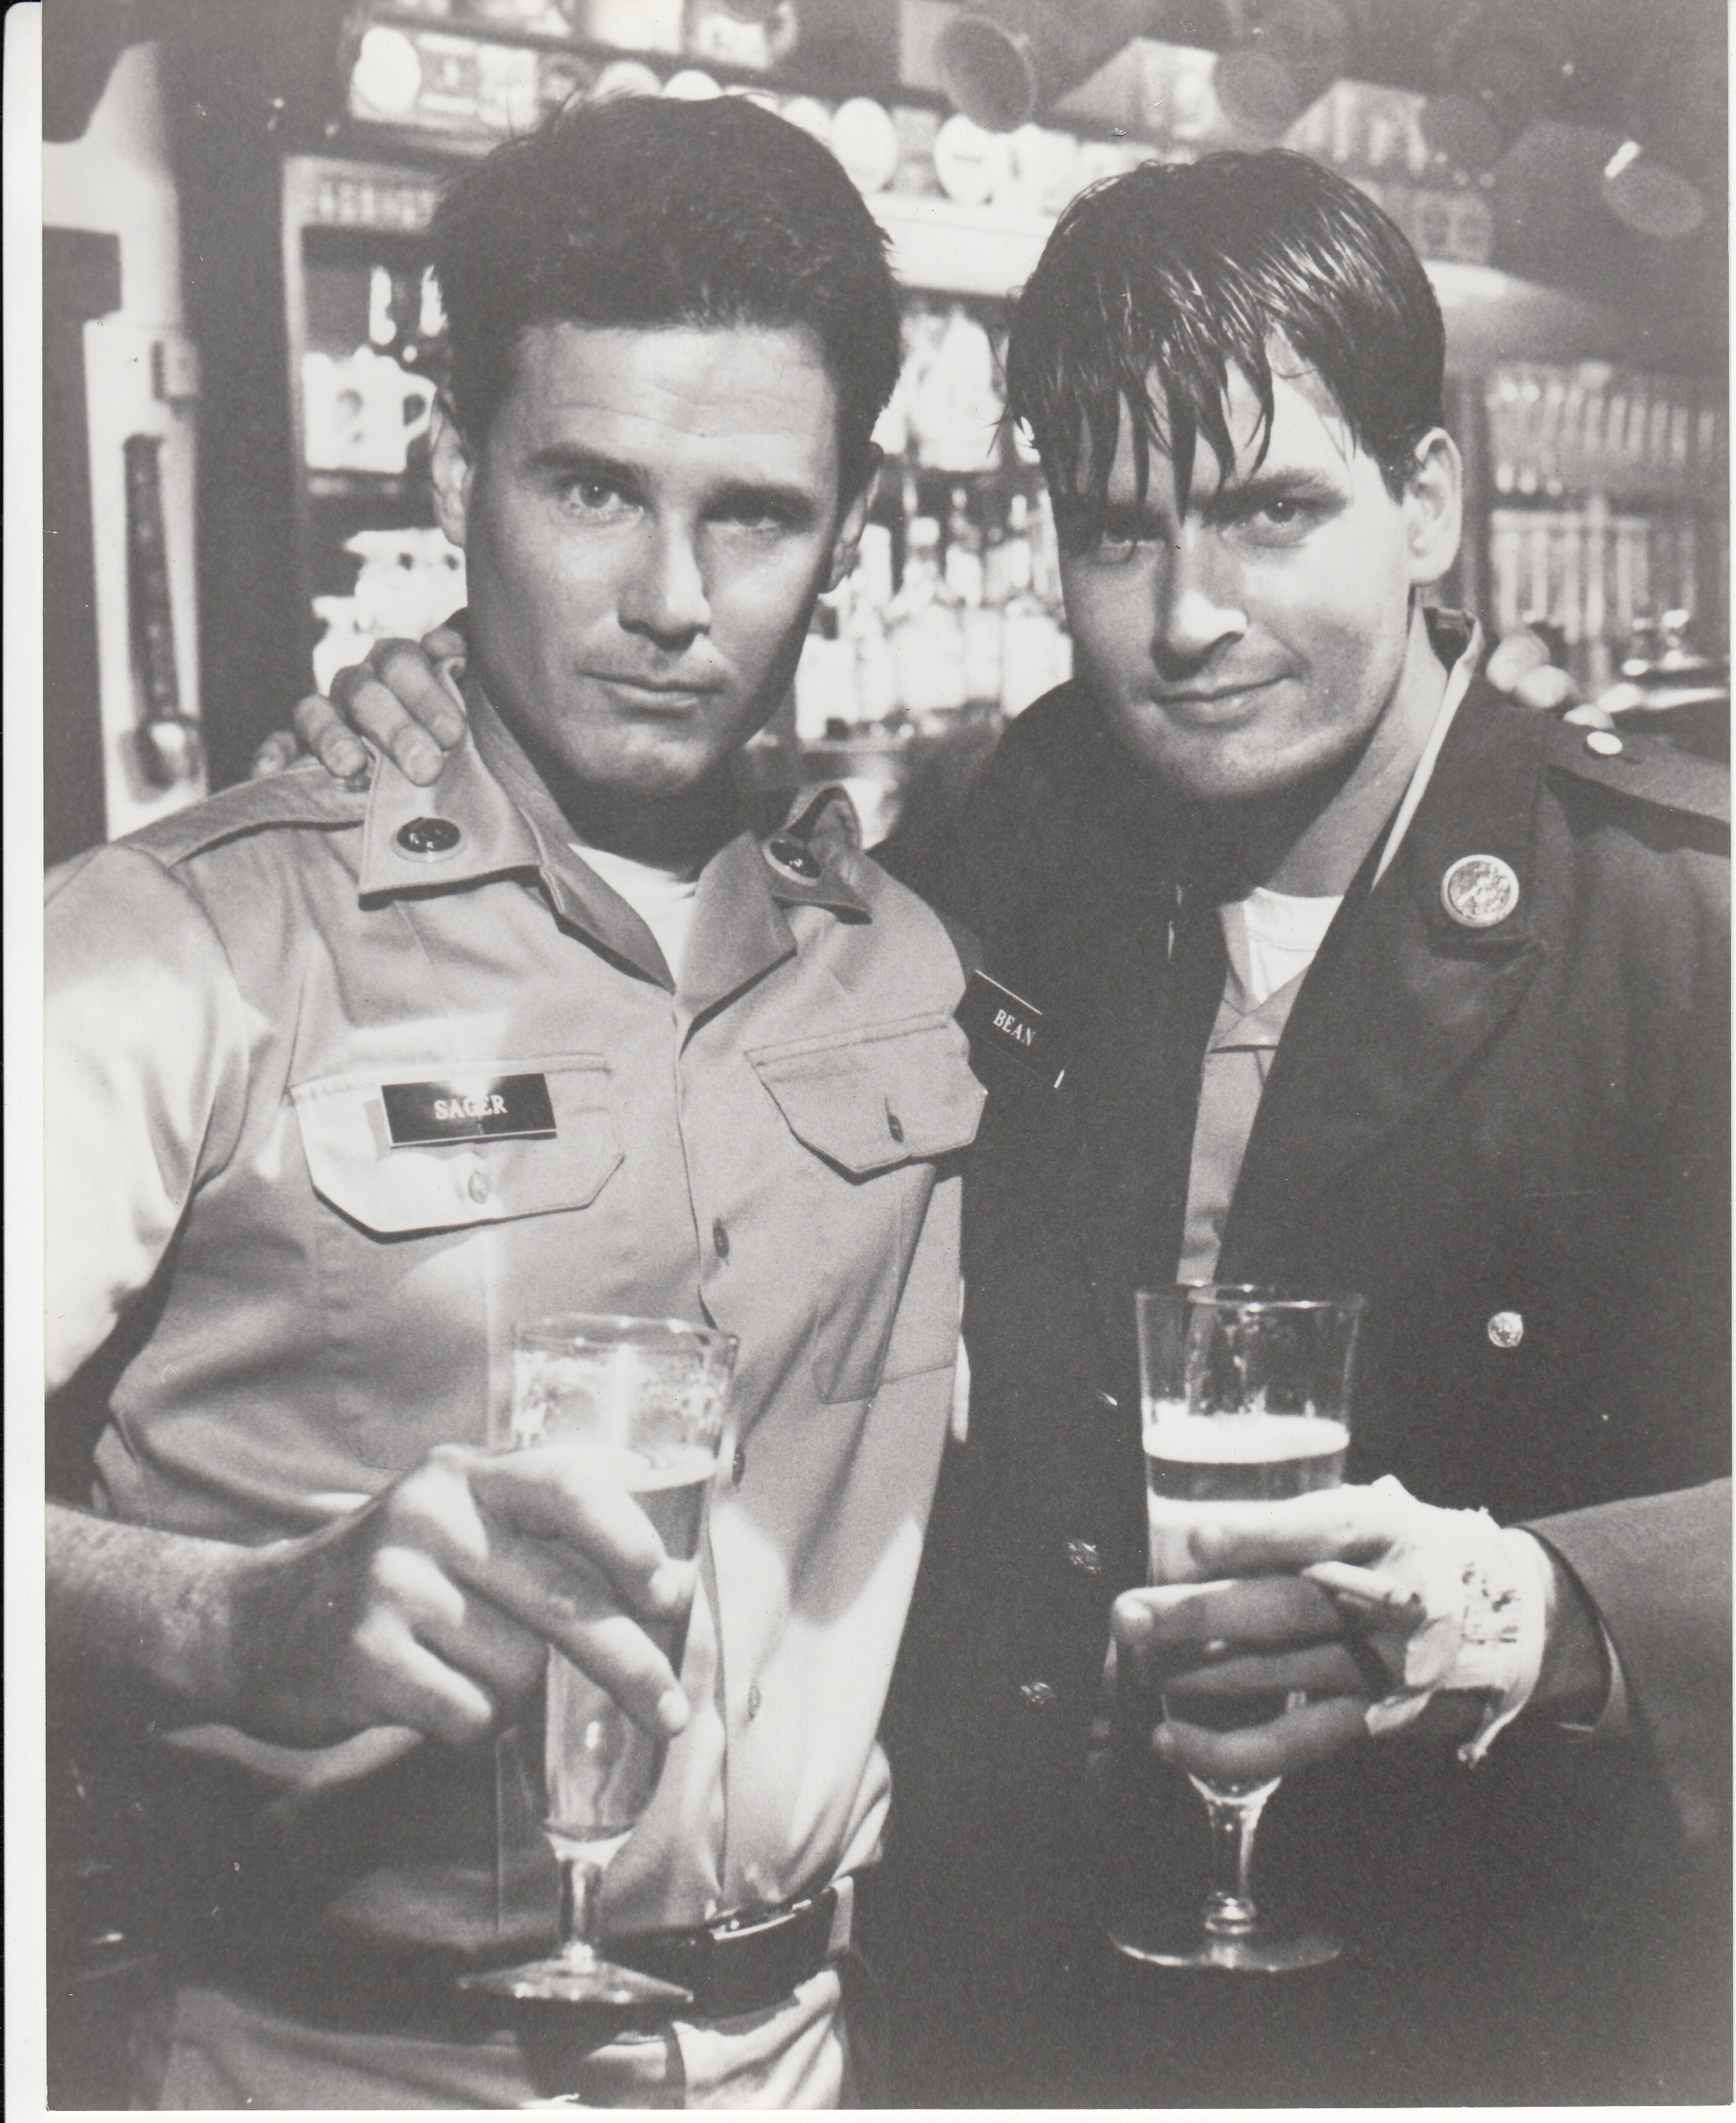 David M. O'Neill and Charlie Sheen in Kamloops Canada on the set of Cadence.